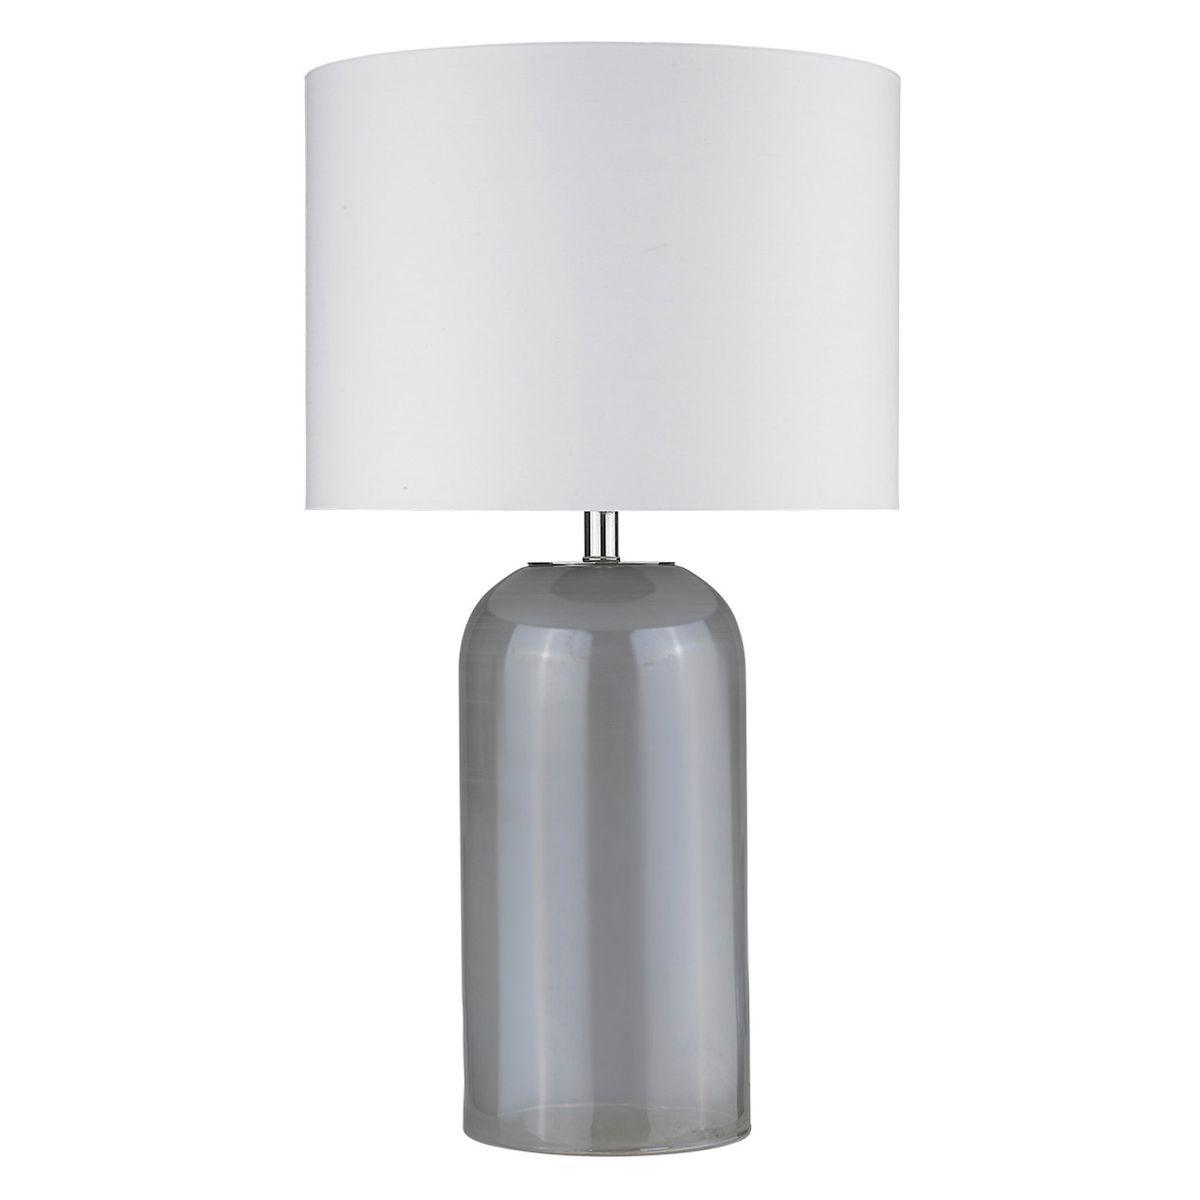 Trend Home 1 Light Table Lamp Grey Glass Body and Polished Nickel Accents